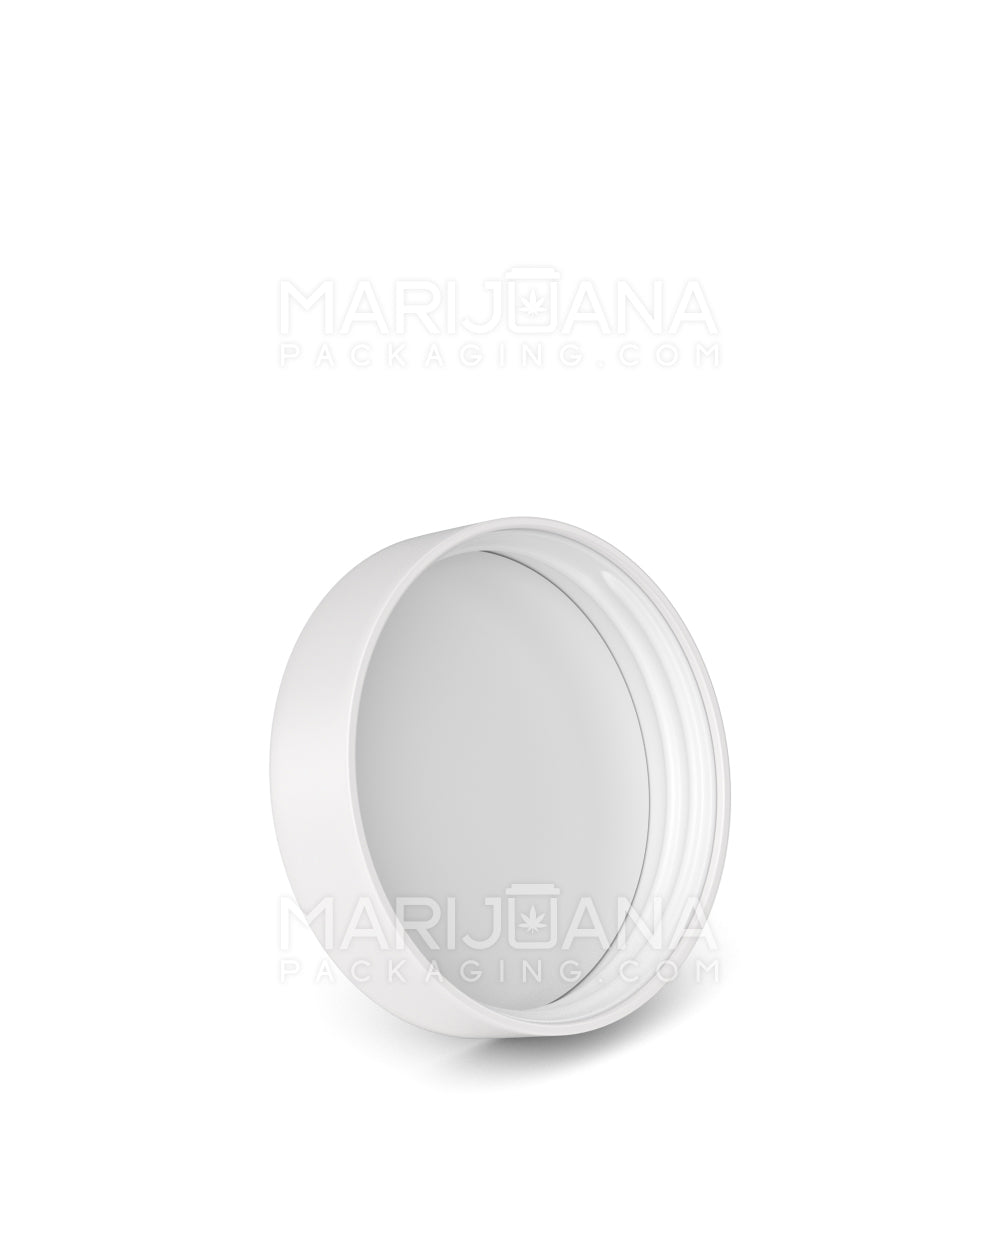 Child Resistant | Smooth Flat Push Down & Turn Plastic Caps w/ Text & Foam Liner | 48mm - Matte White - 120 Count - 2